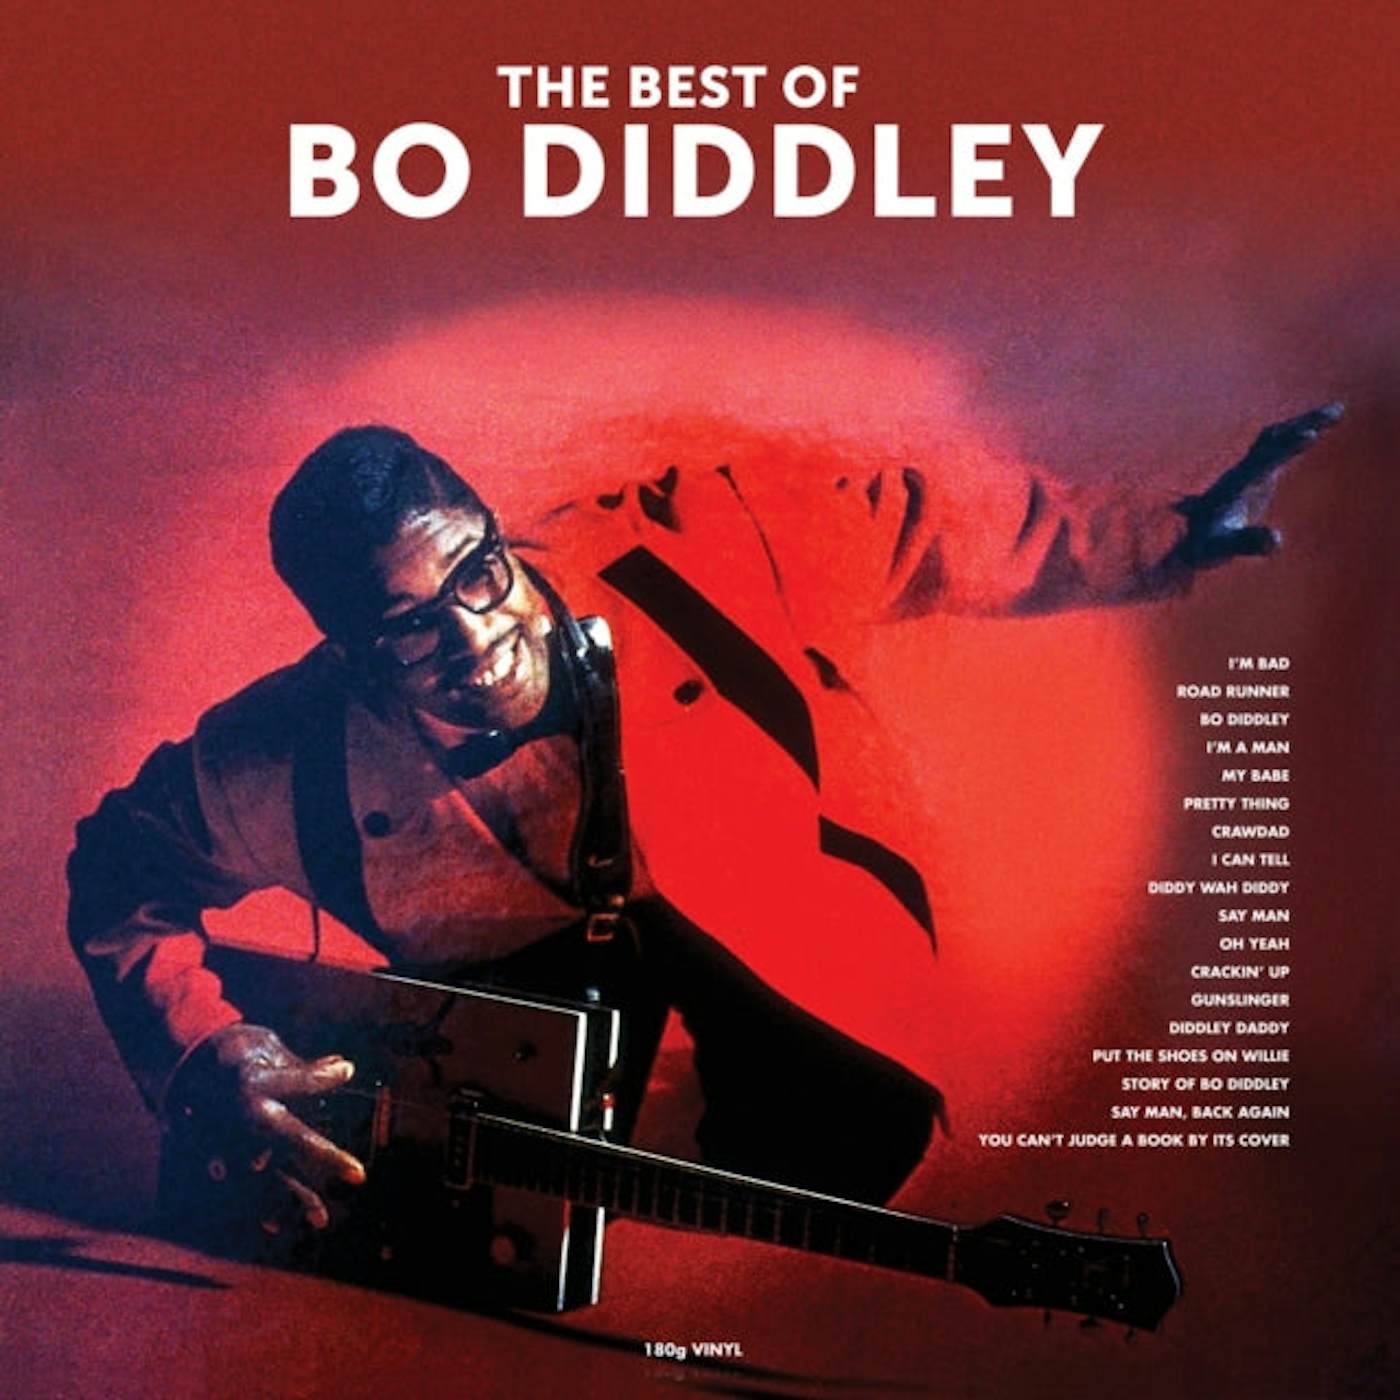 Bo Diddley LP Vinyl Record - The Best Of